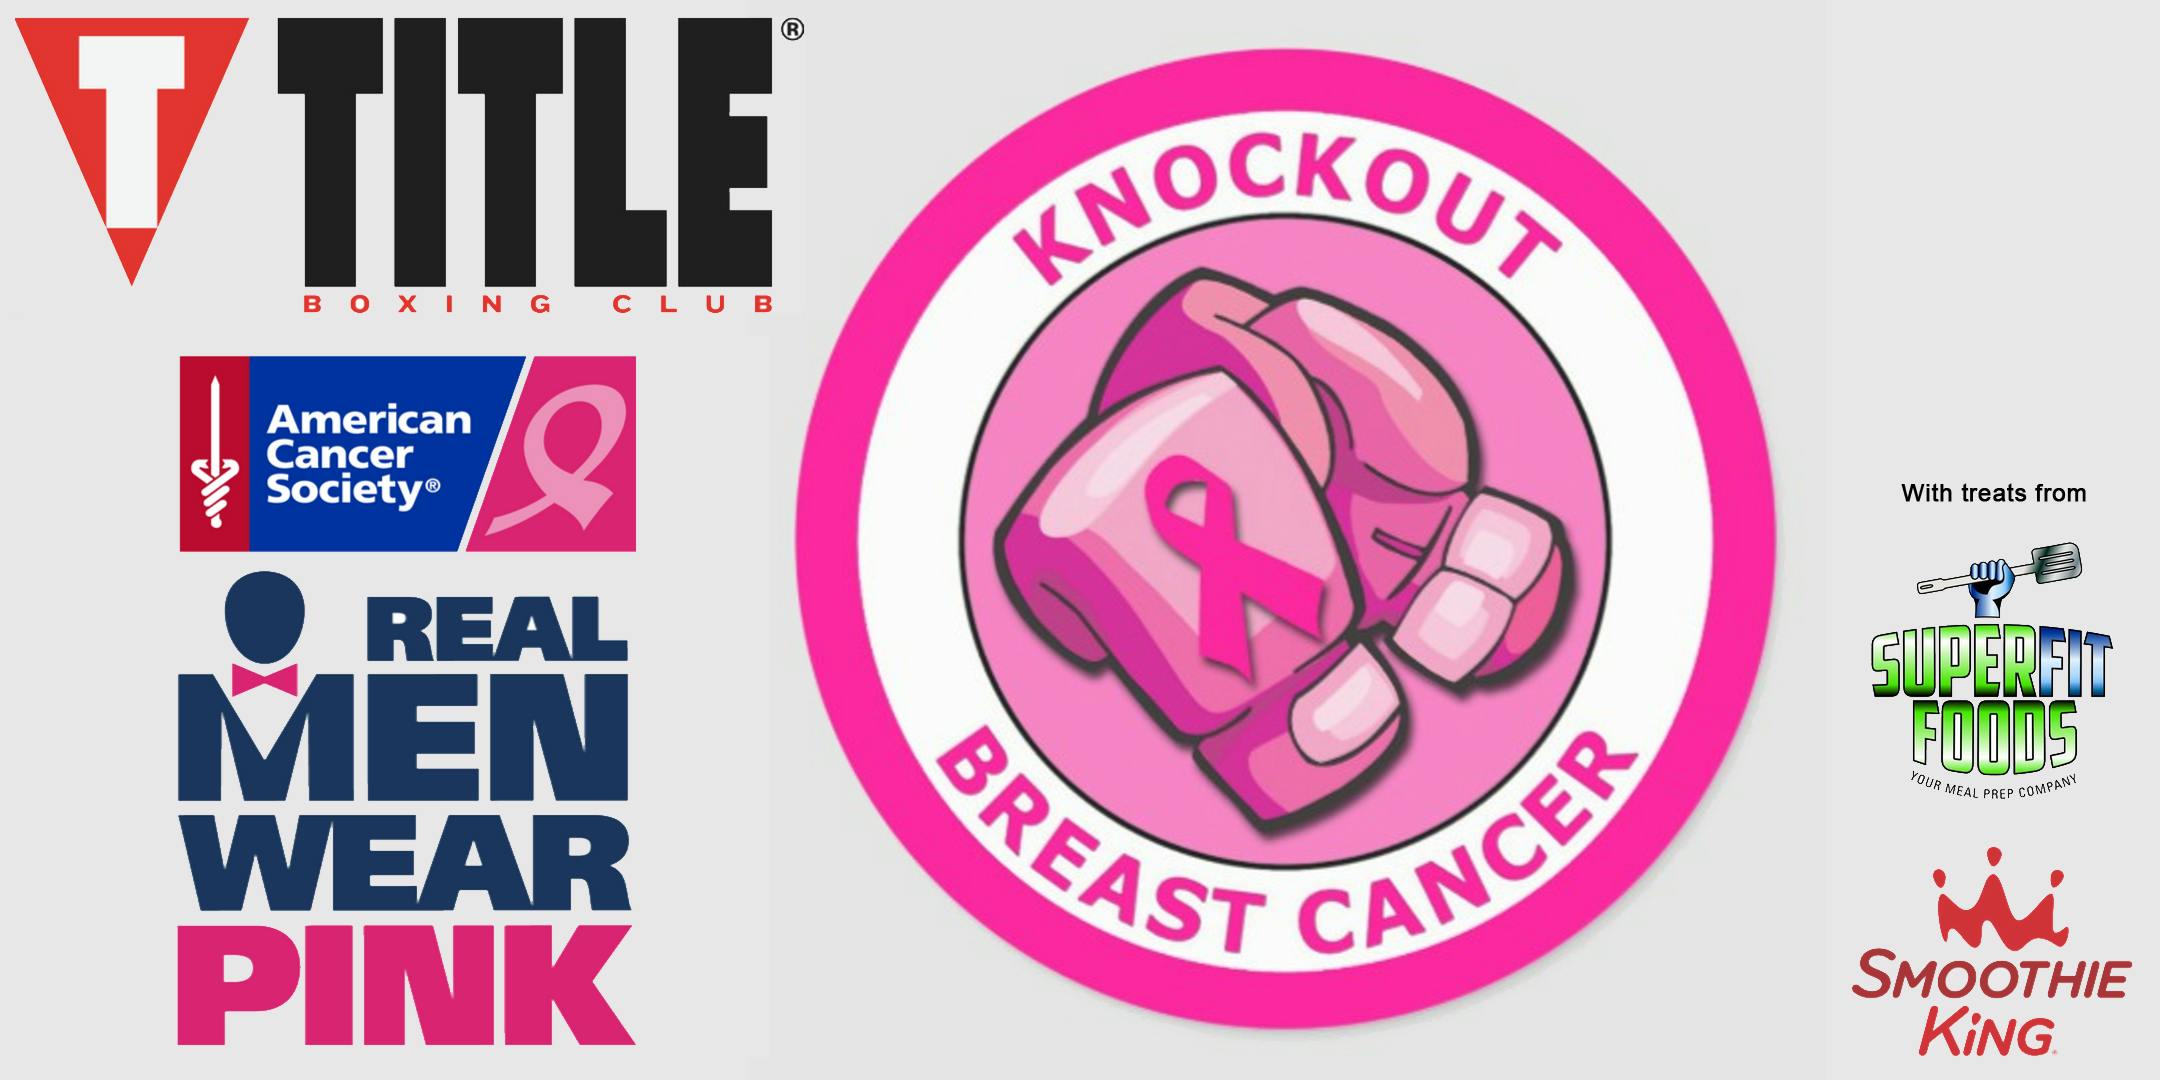 Knock Out Breast Cancer